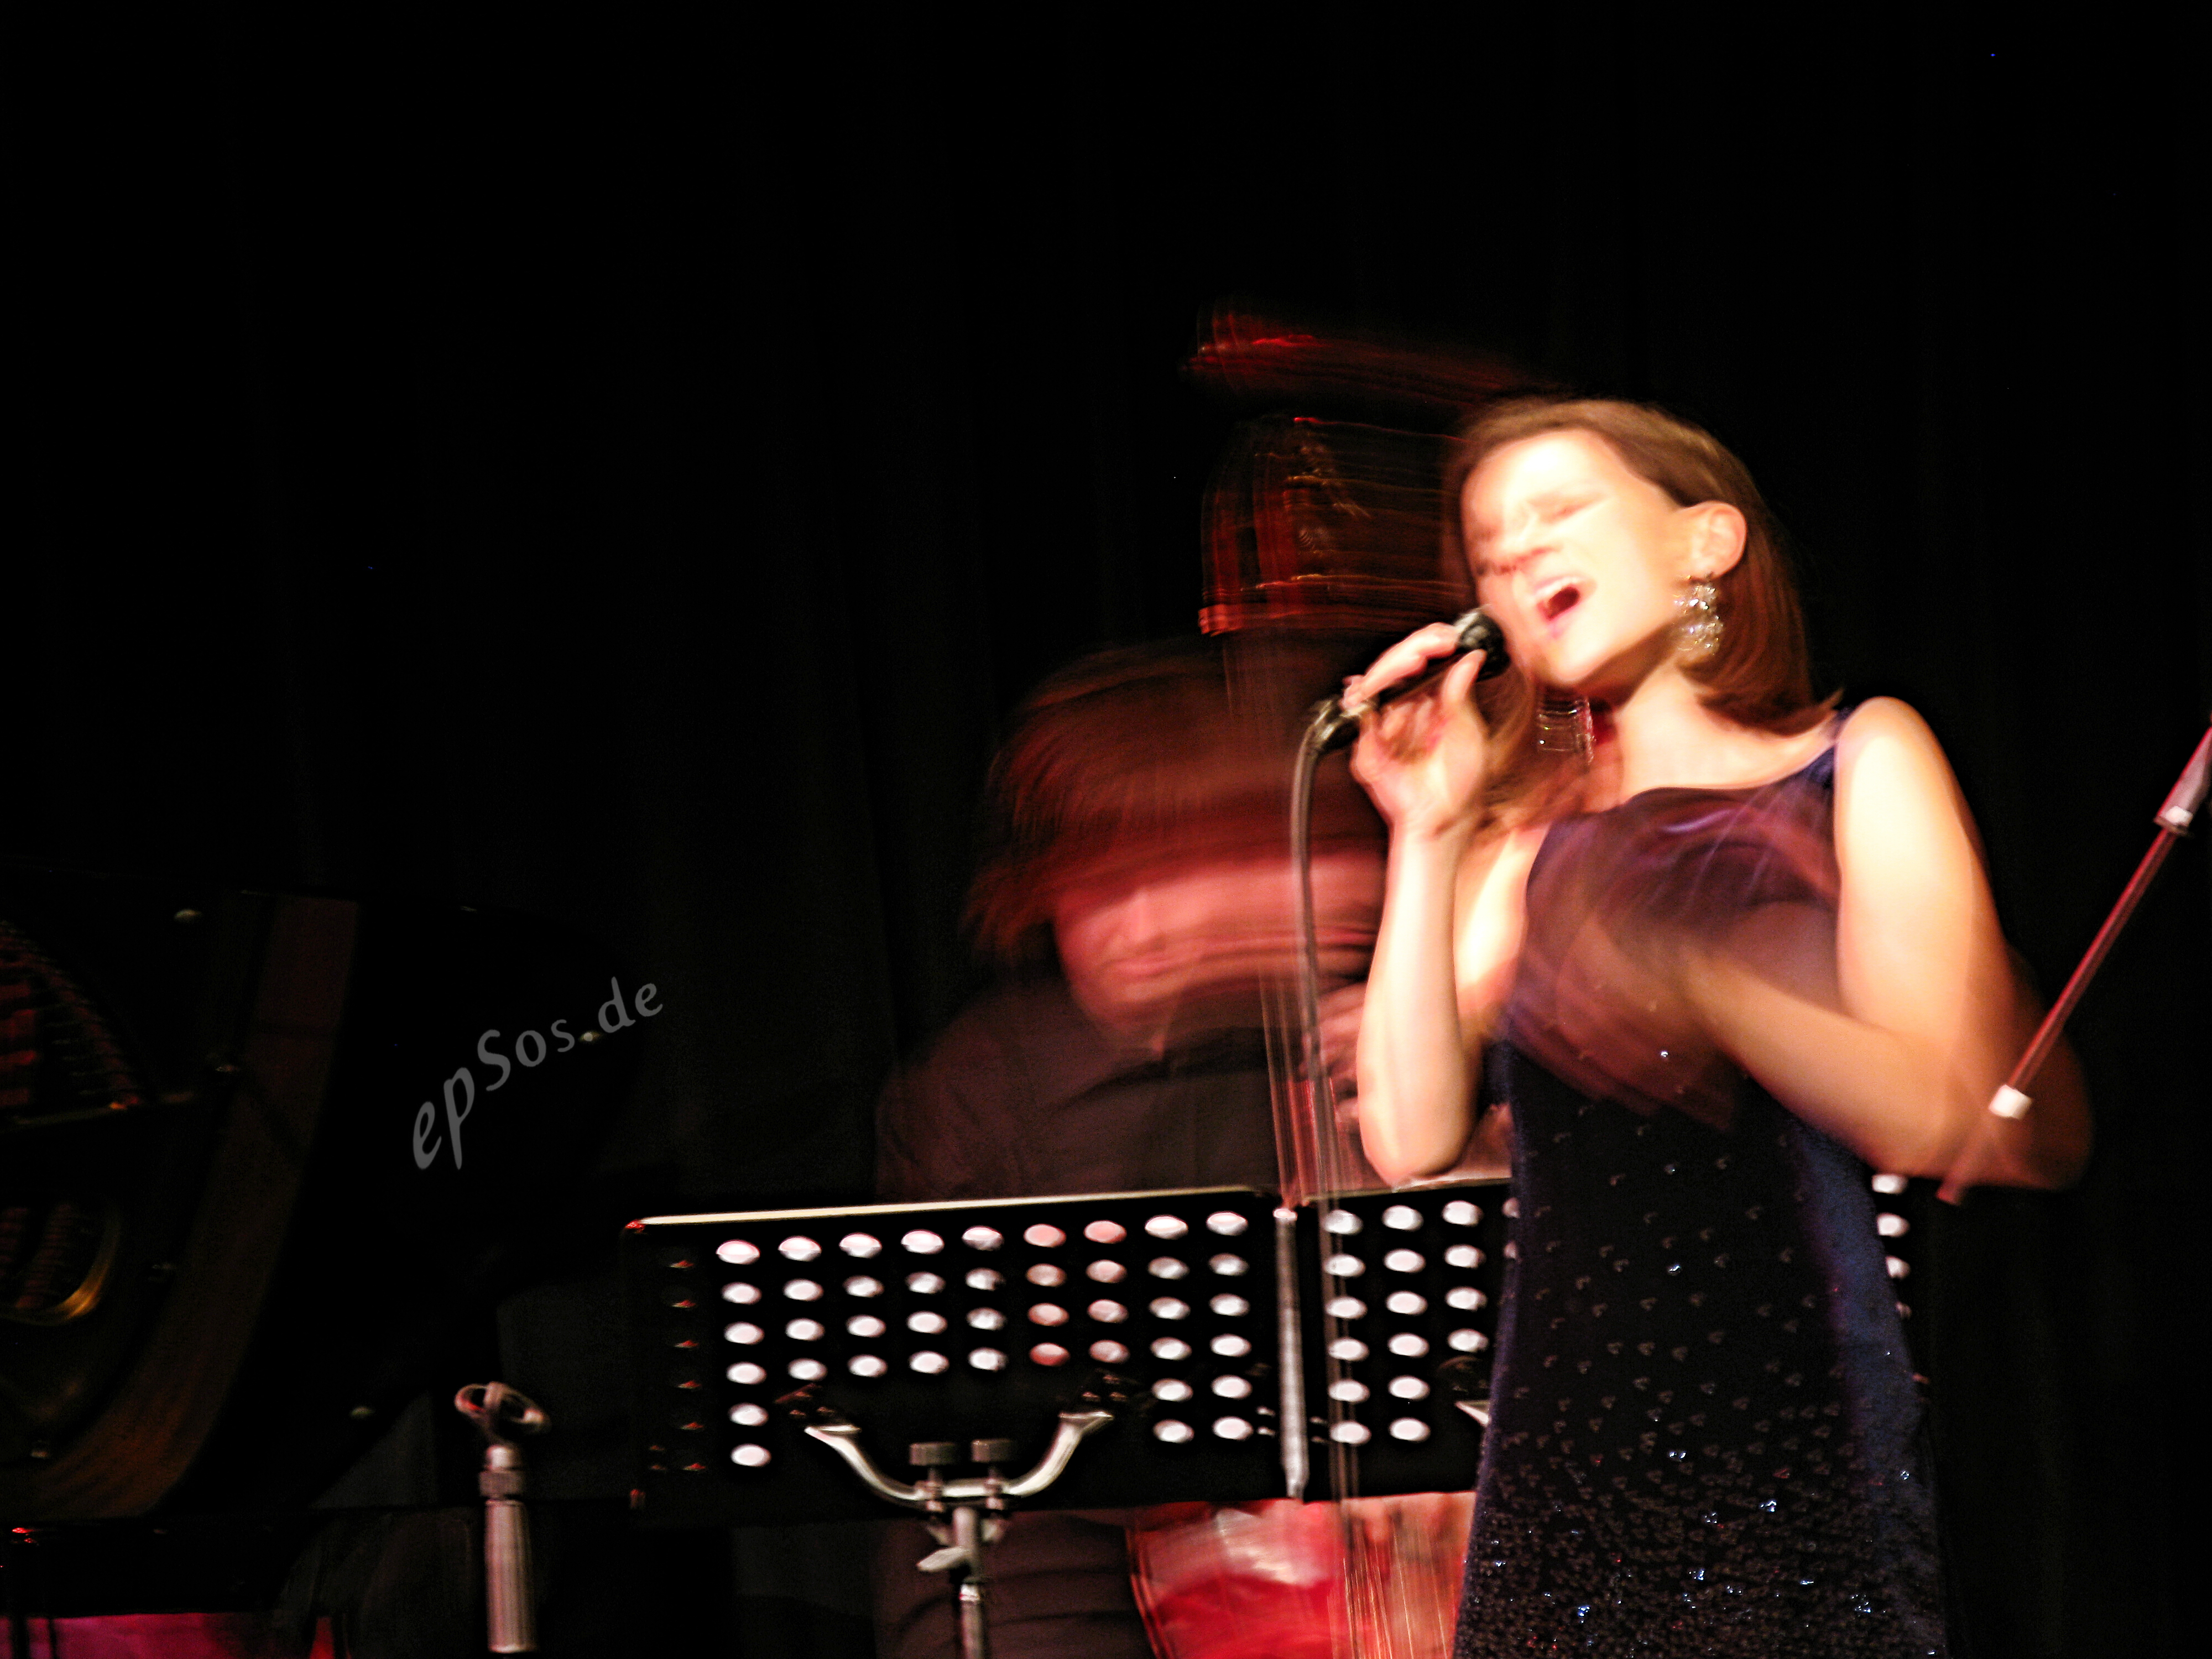 File:Artist Woman Singing Concert in Jazz  - Wikimedia Commons